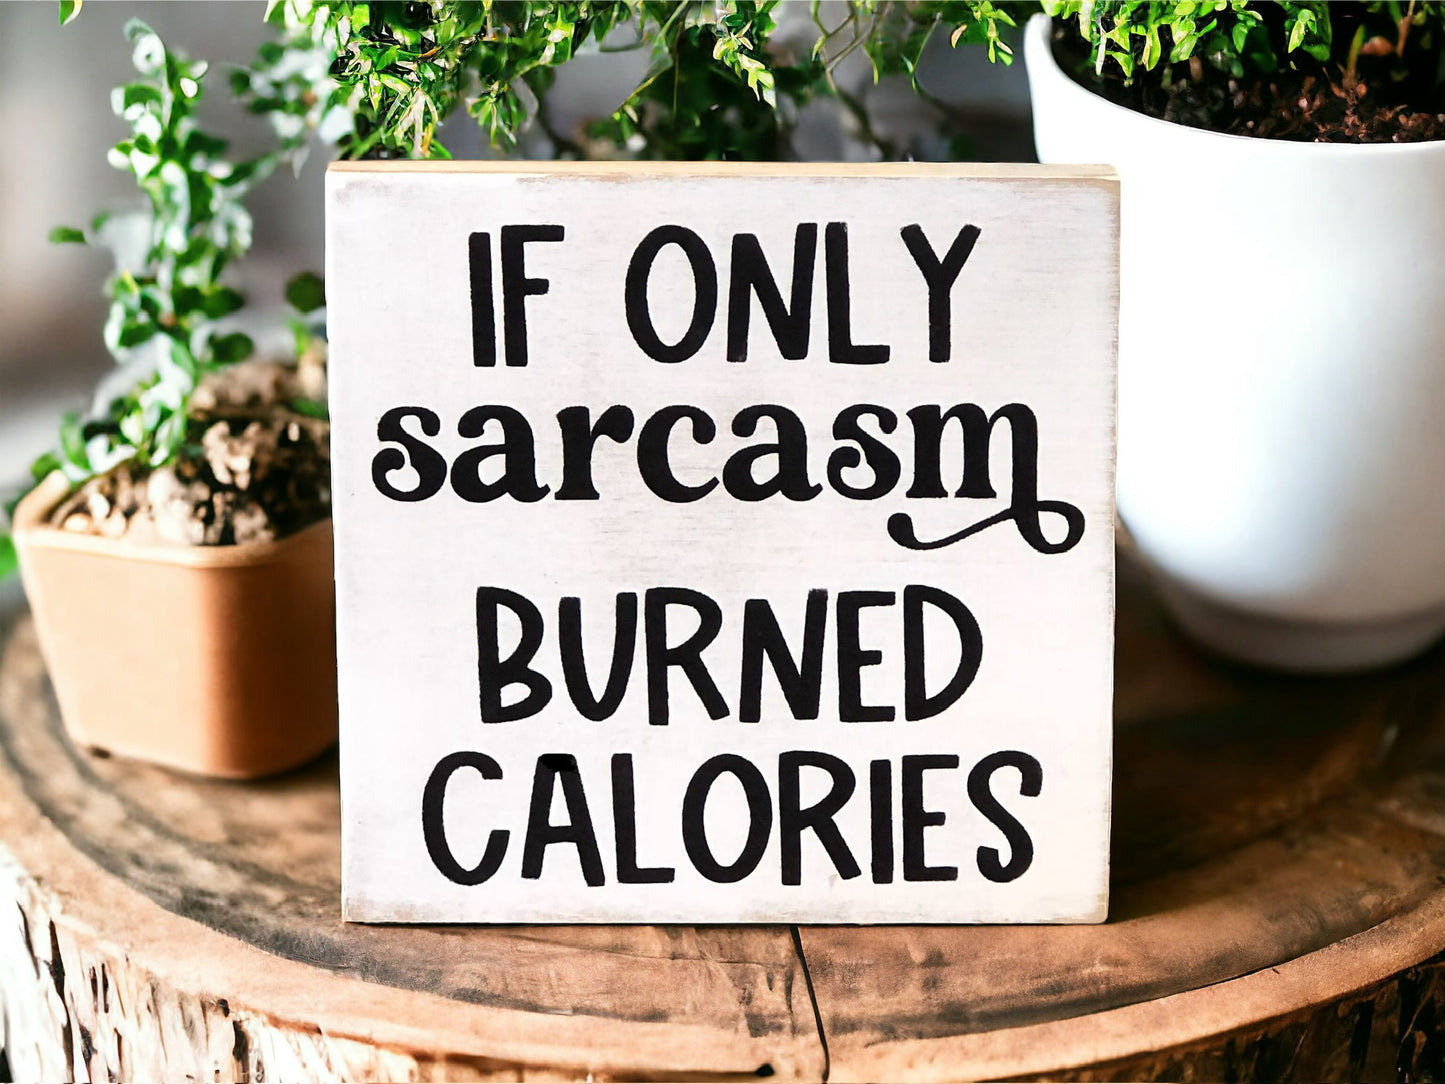 If Only Sarcasm Burned Calories - Funny Rustic Shelf Sitter